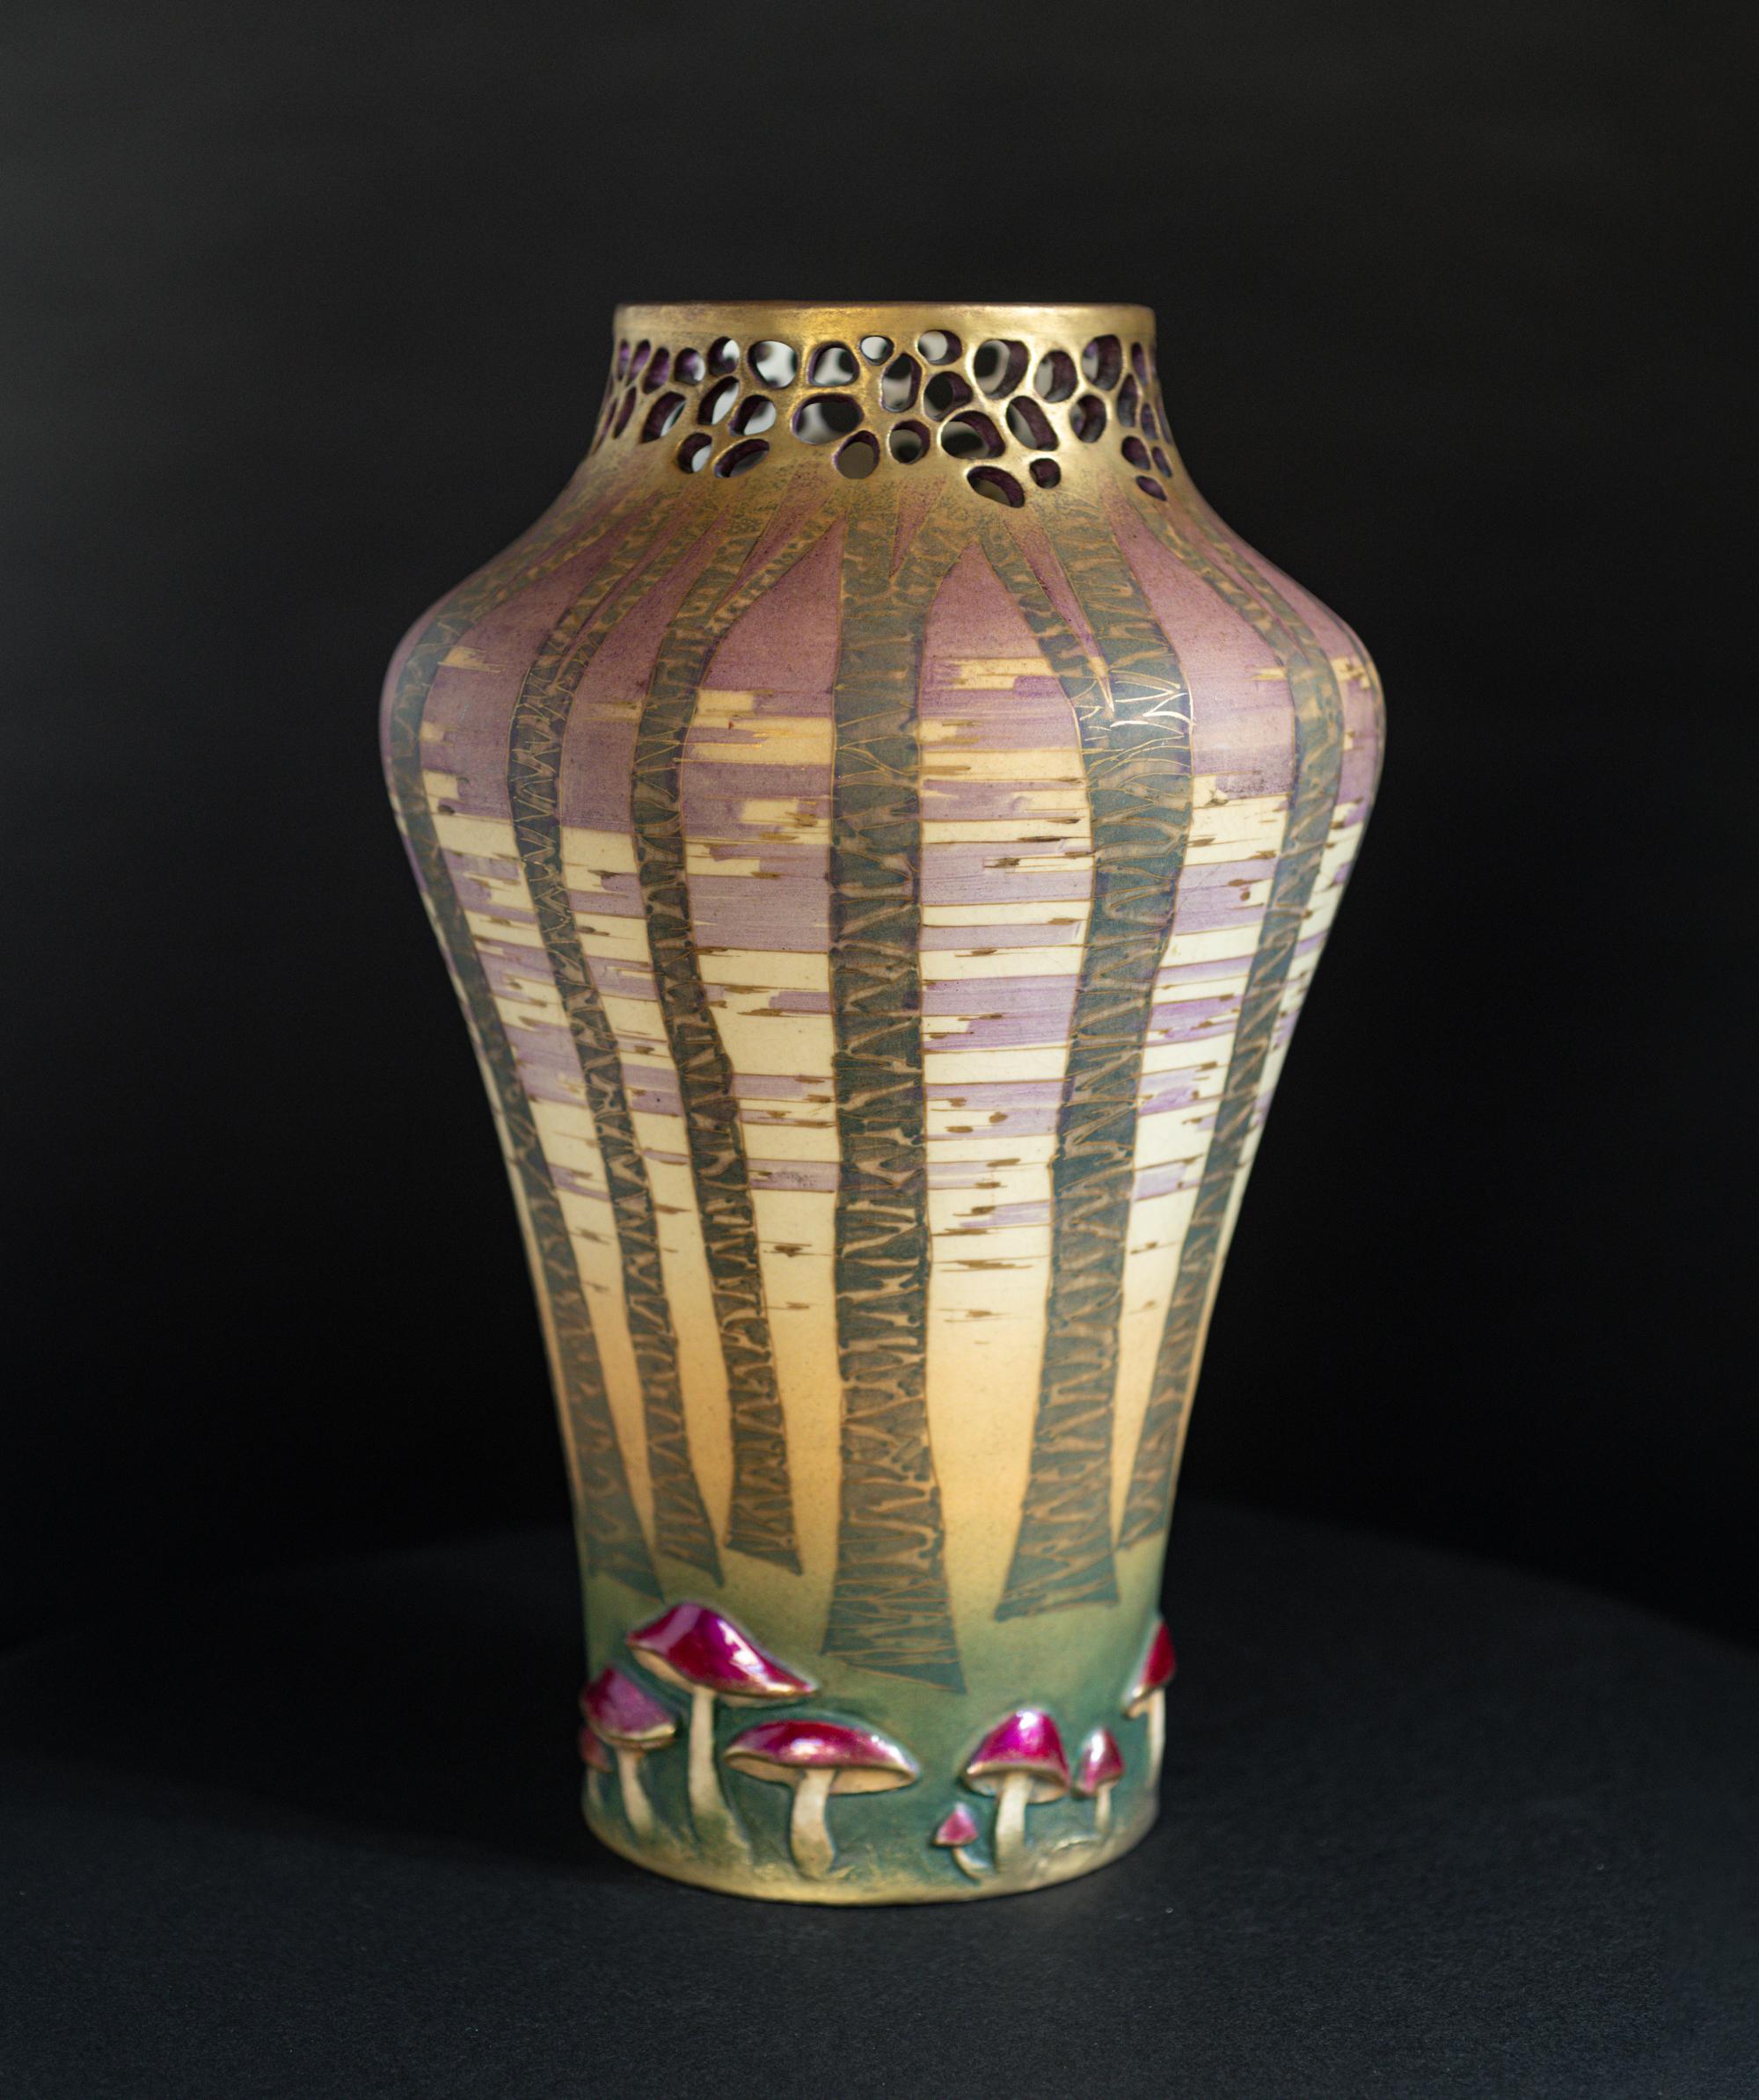 Art Nouveau Amphora Reticulated Vase with Forest & Mushroom by Paul Dachsel for Kunstkeramik